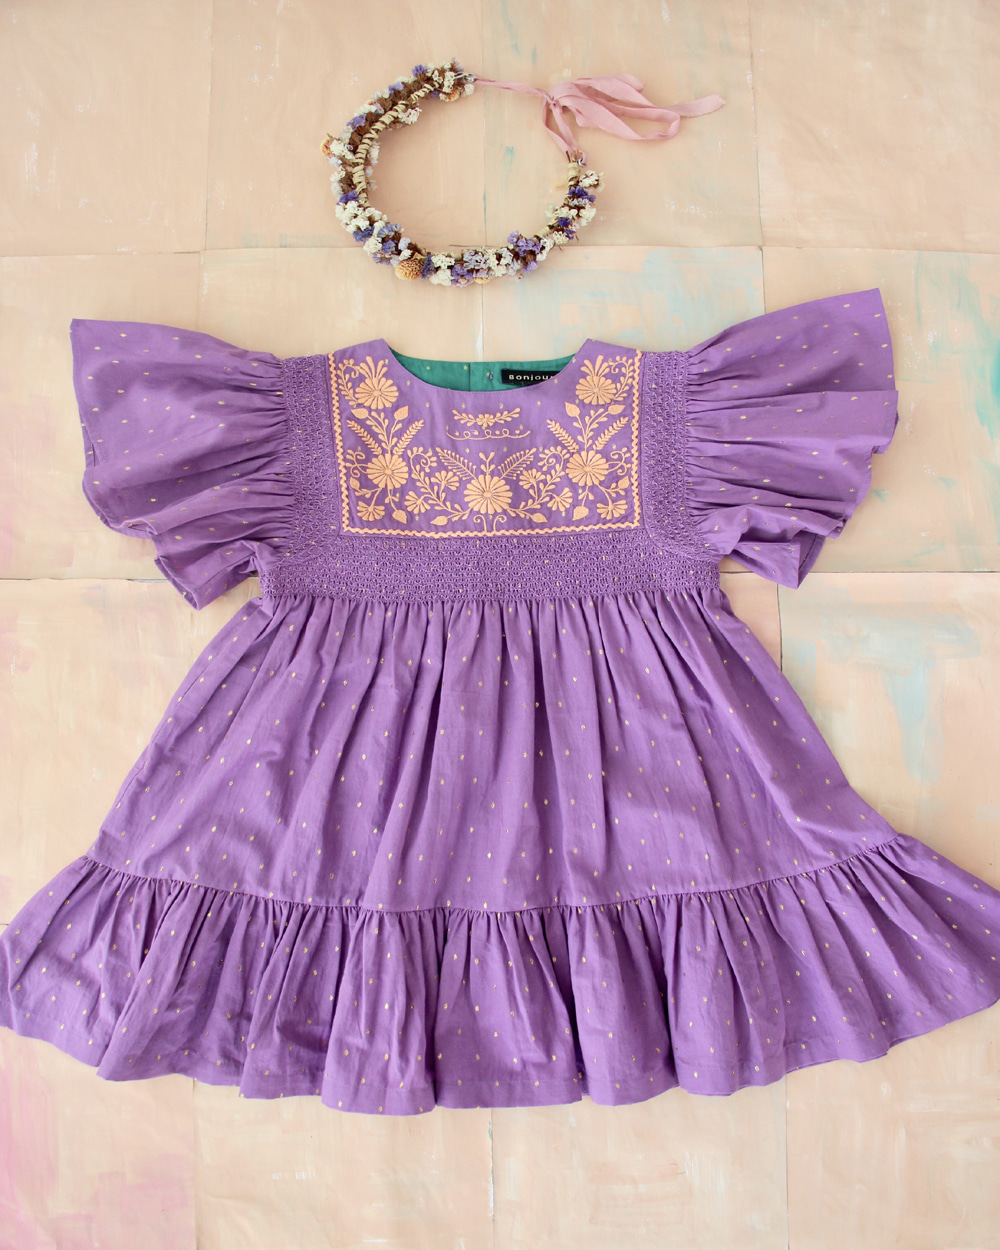 [BONJOUR] New Rosalie dress with new sleeves /pupple [3Y]